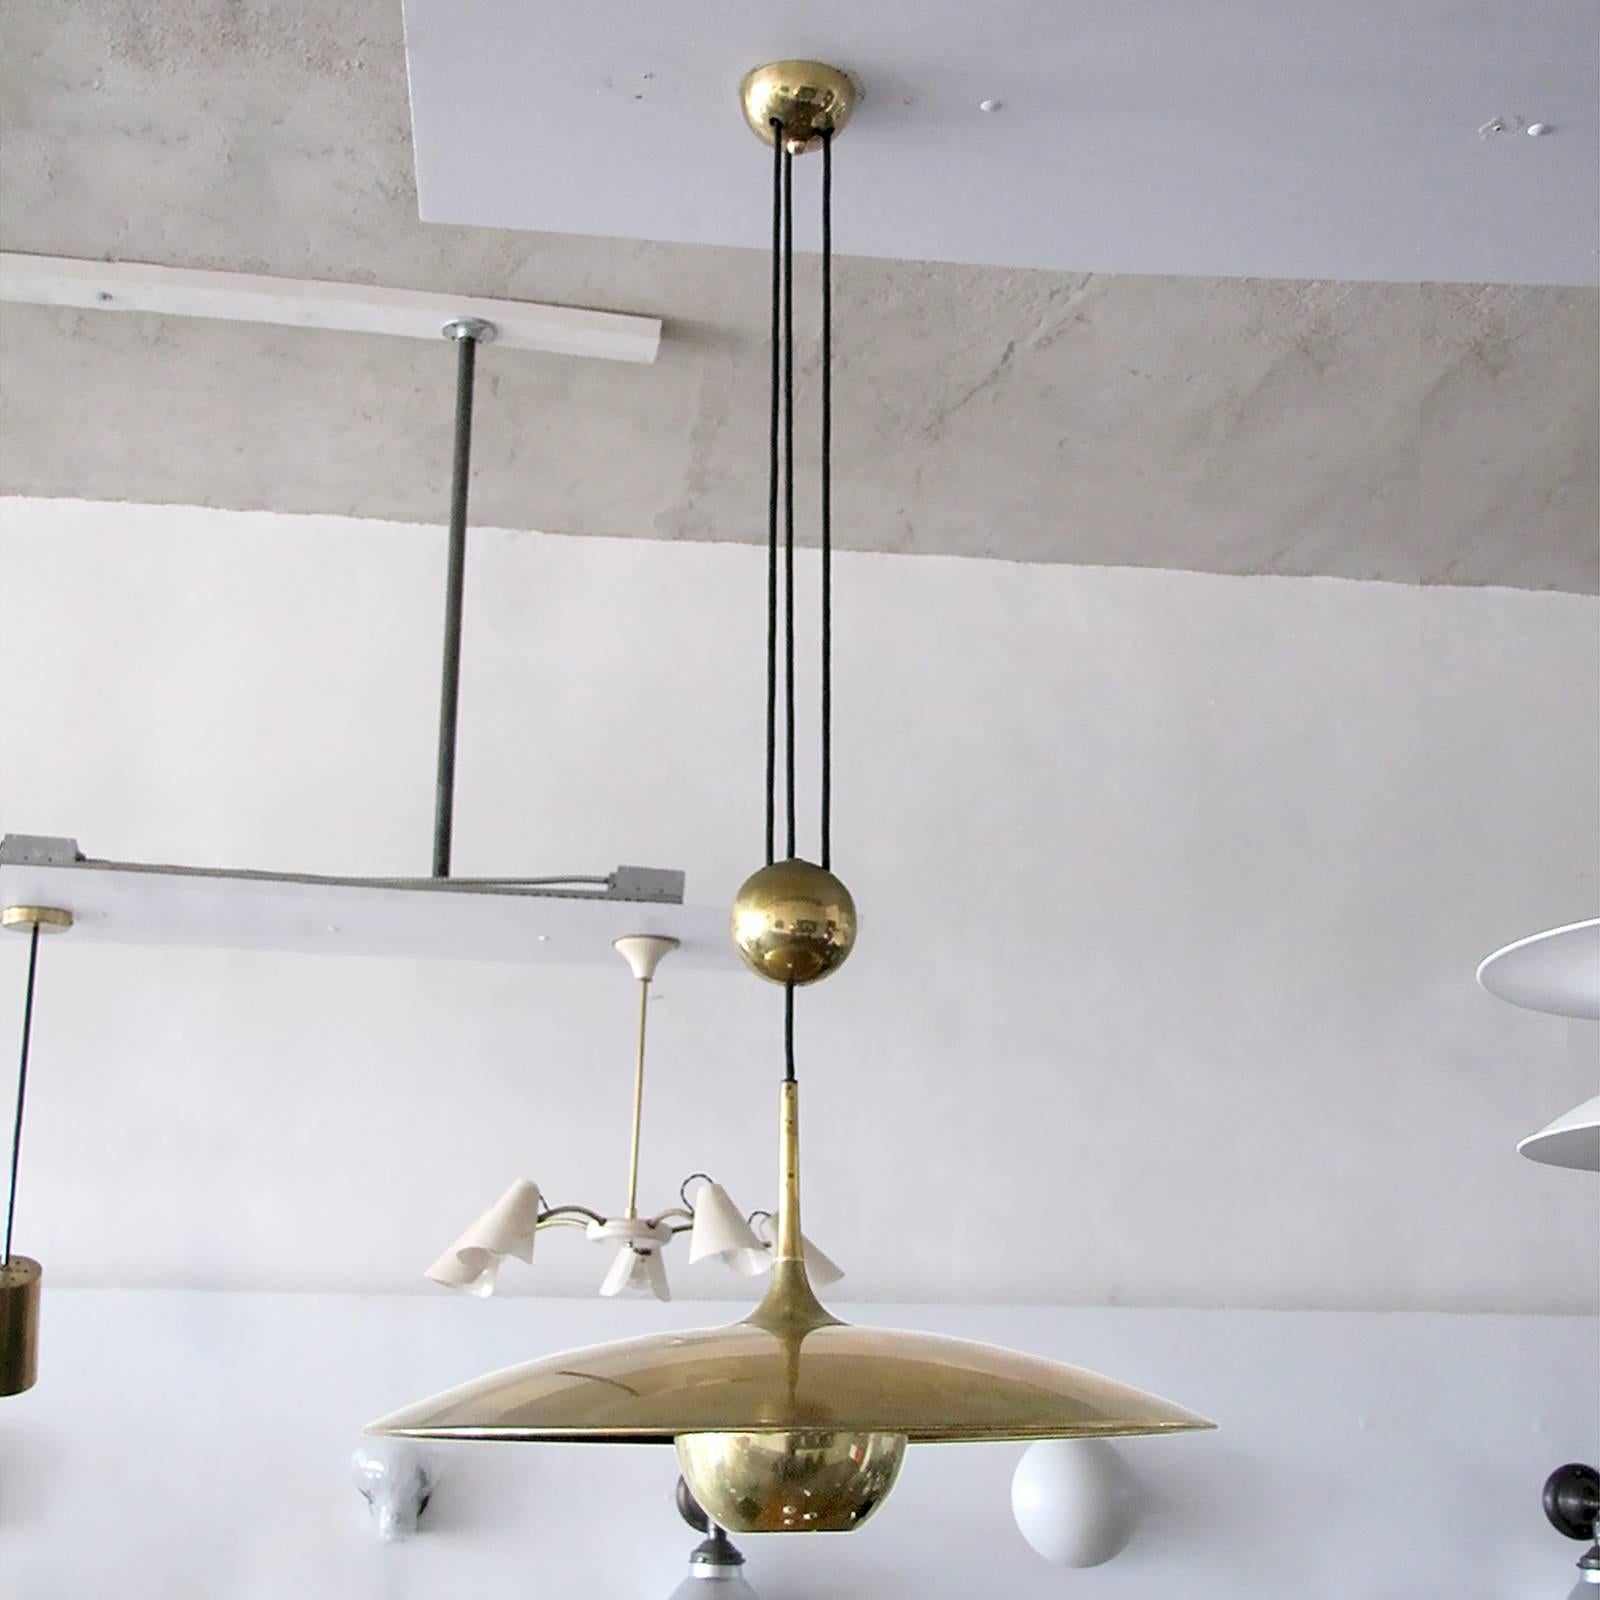 Large brass saucer by Florian Schulz with pulley mechanism, a heavy brass ball counter balances the weight of the fully adjustable shade (total height between 30